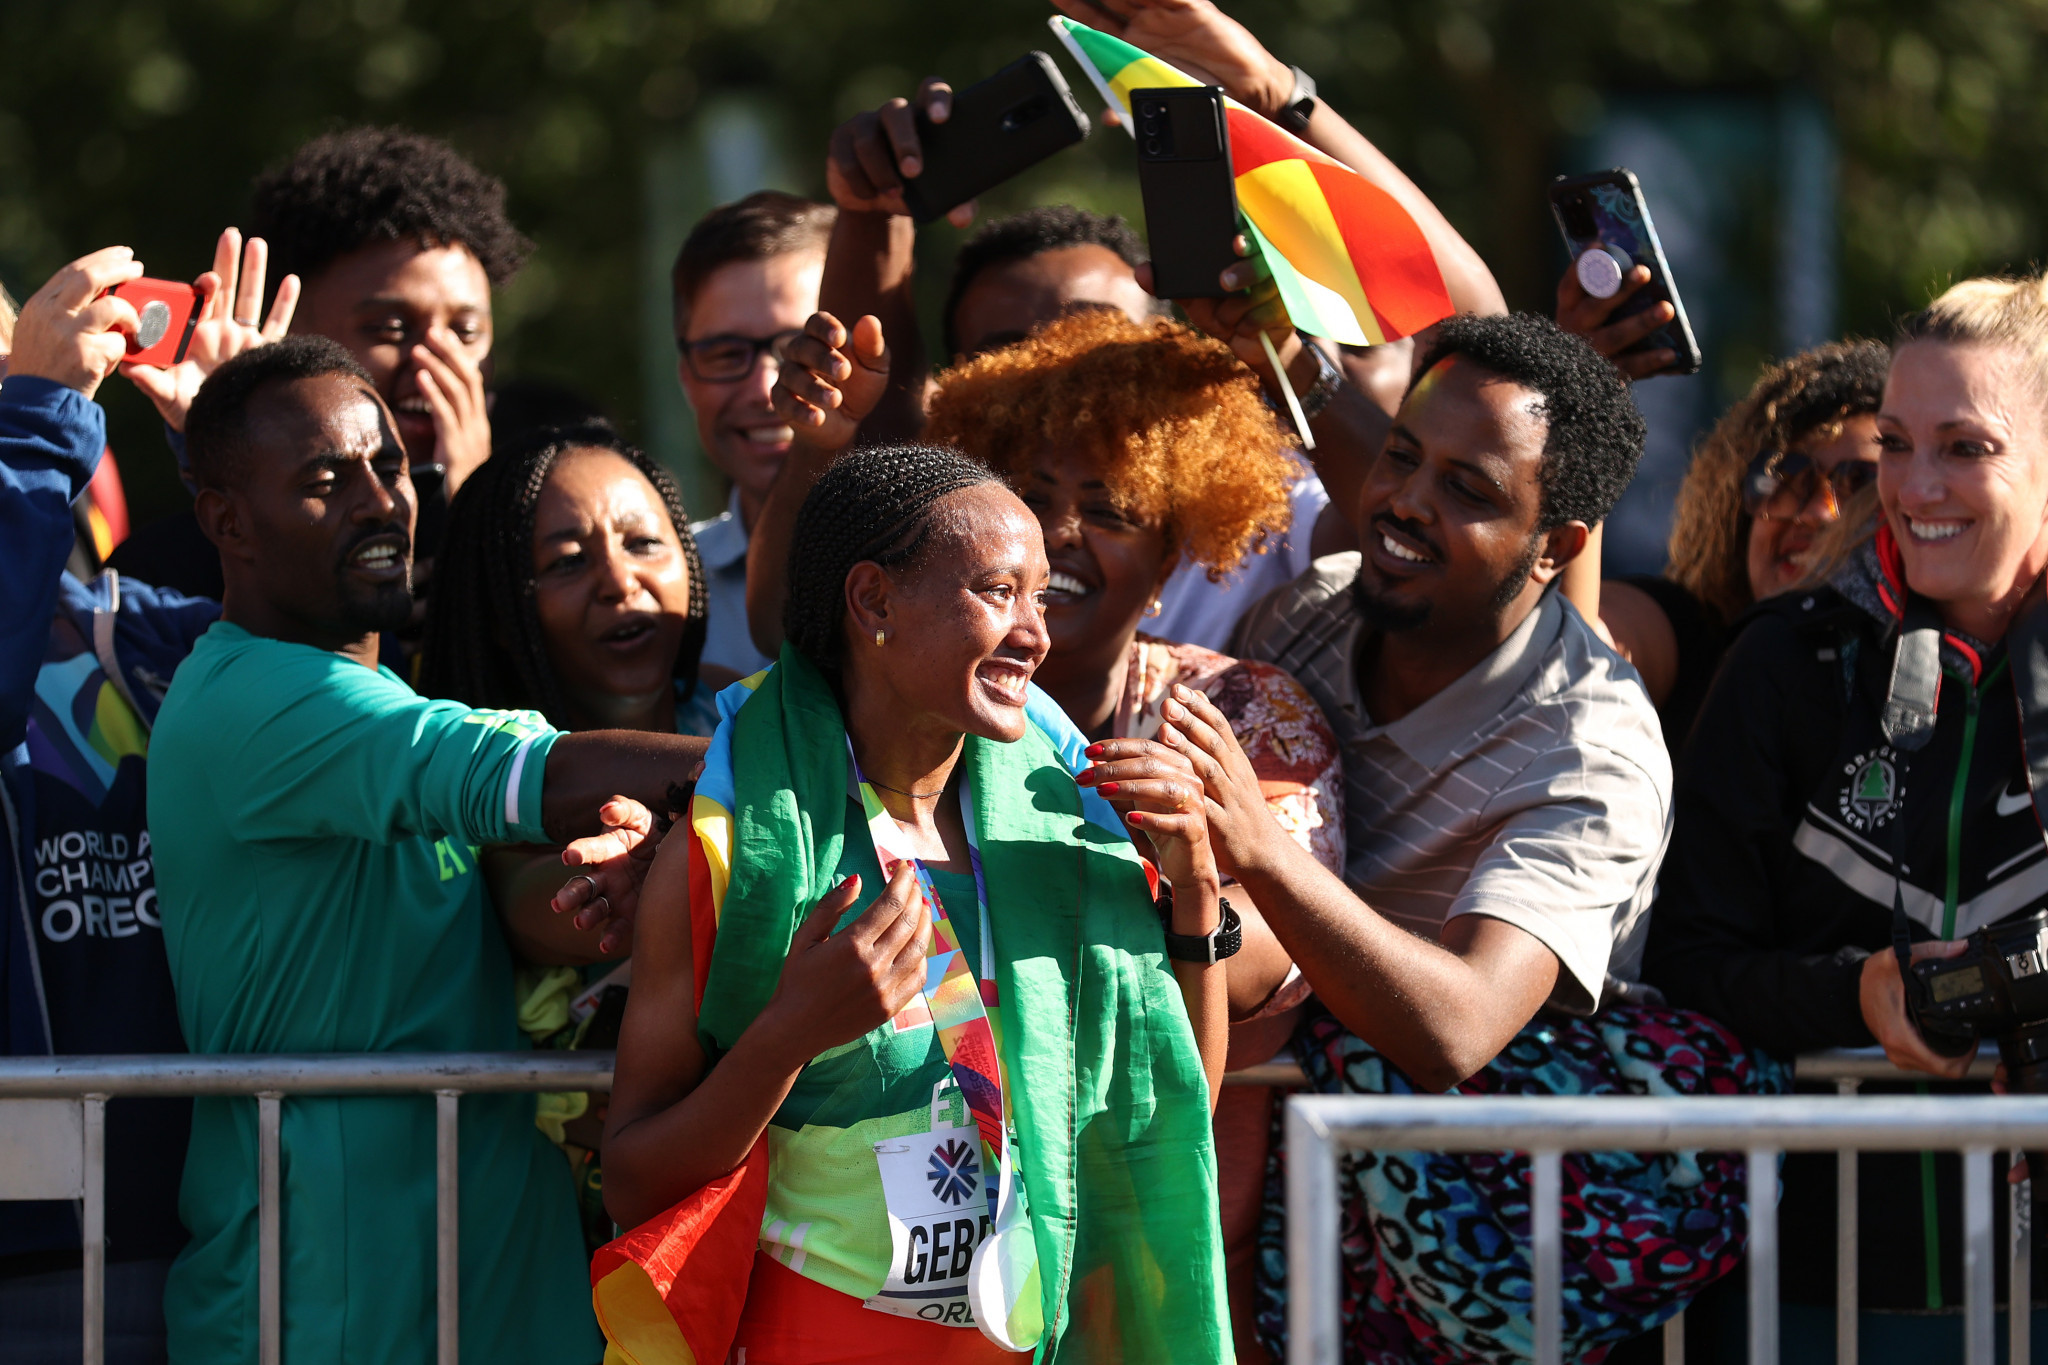 Ethiopian Gotytom Gebreslase made her marathon debut in Berlin last year and bettered Paula Radcliffe of Britain's time of 2:20:57 from Helsinki 2005 in Oregon ©Getty Images